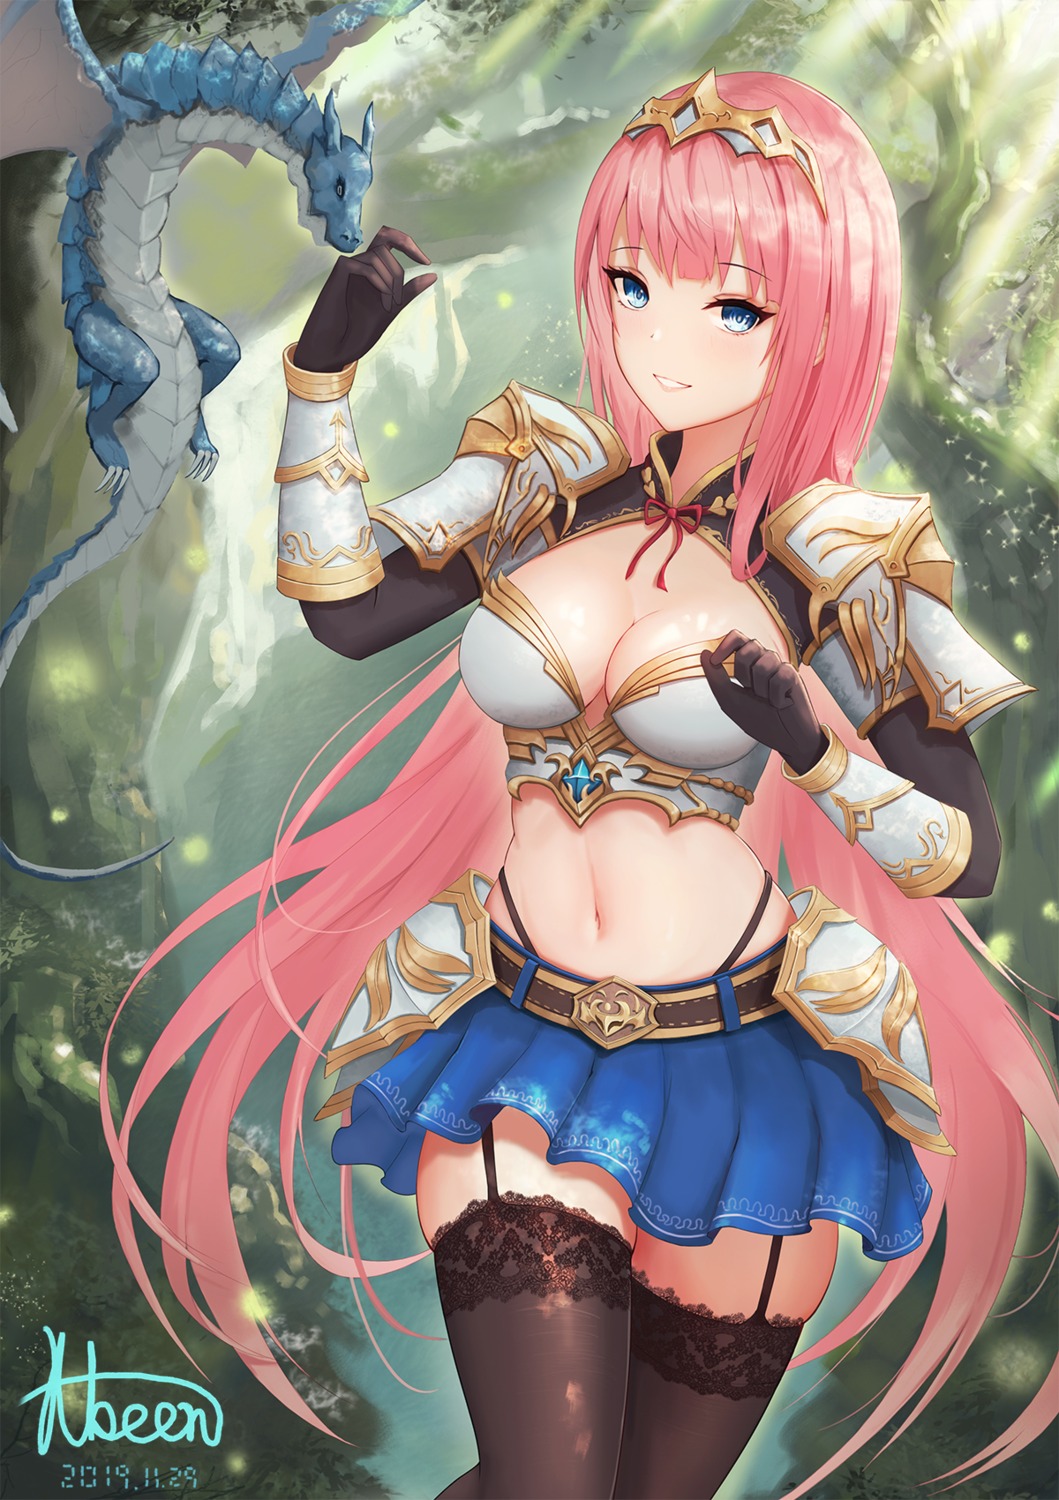 abeen_jhong armor bikini_armor cleavage monster stockings thighhighs